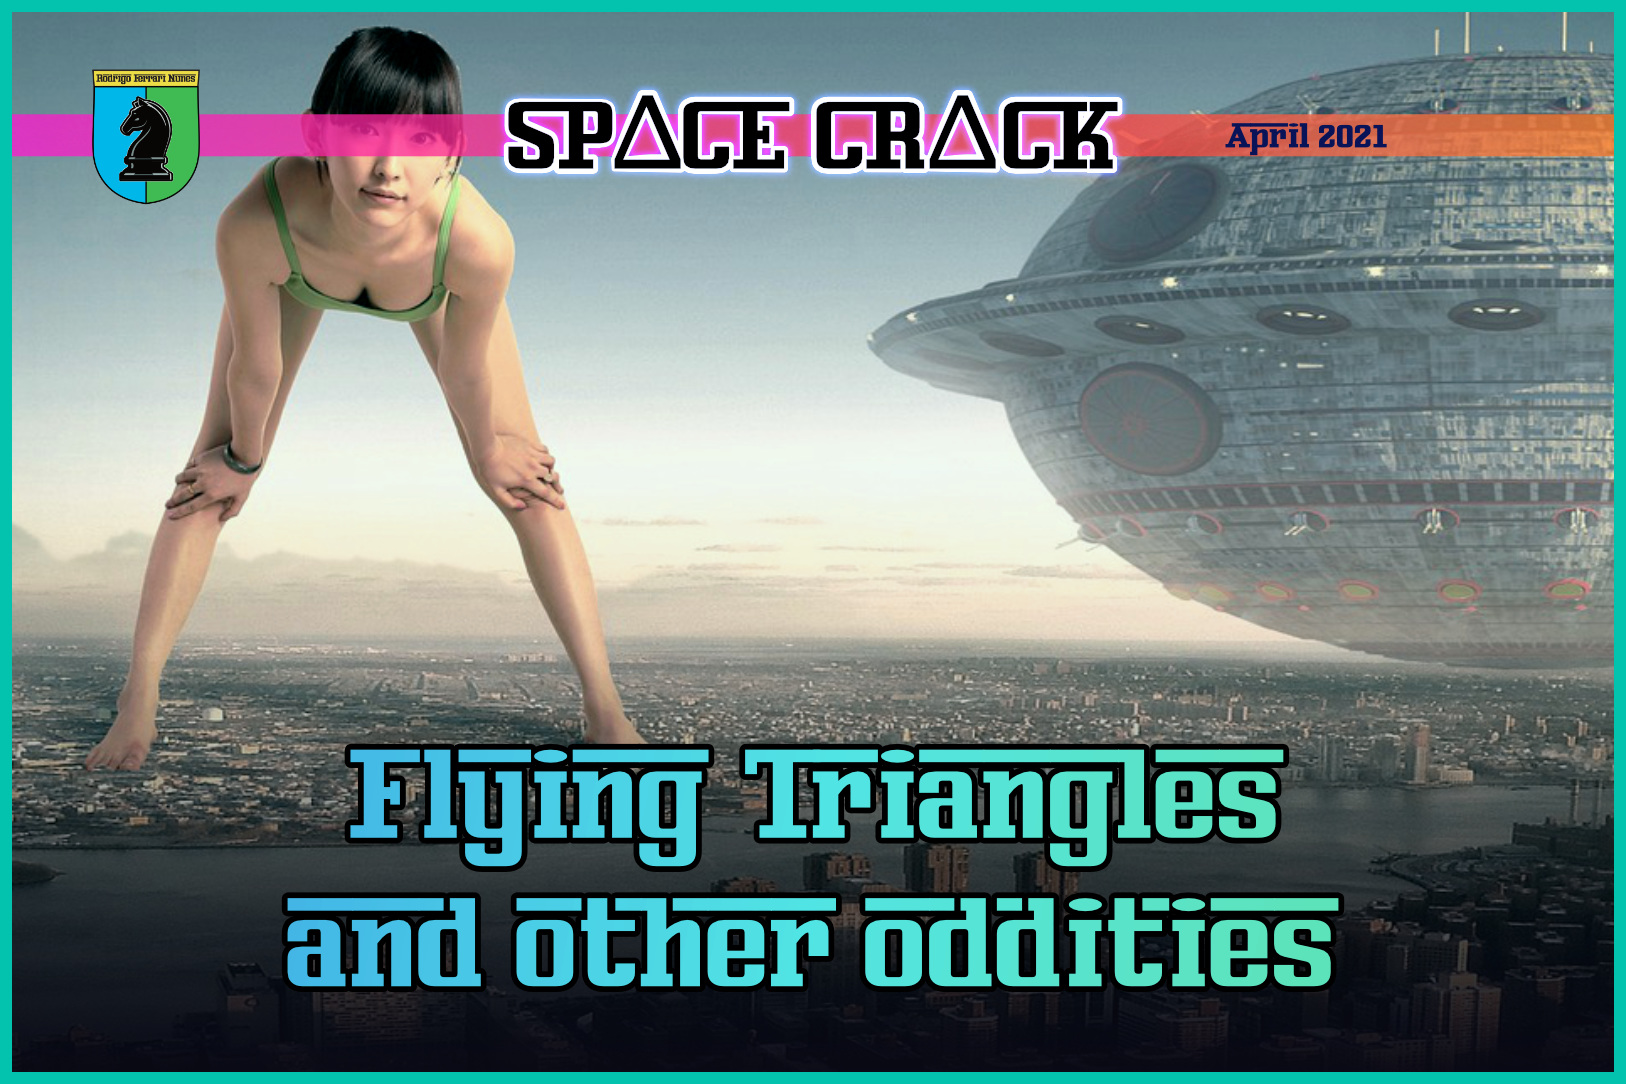 FLYING TRIANGLES AND OTHER ODDITIES